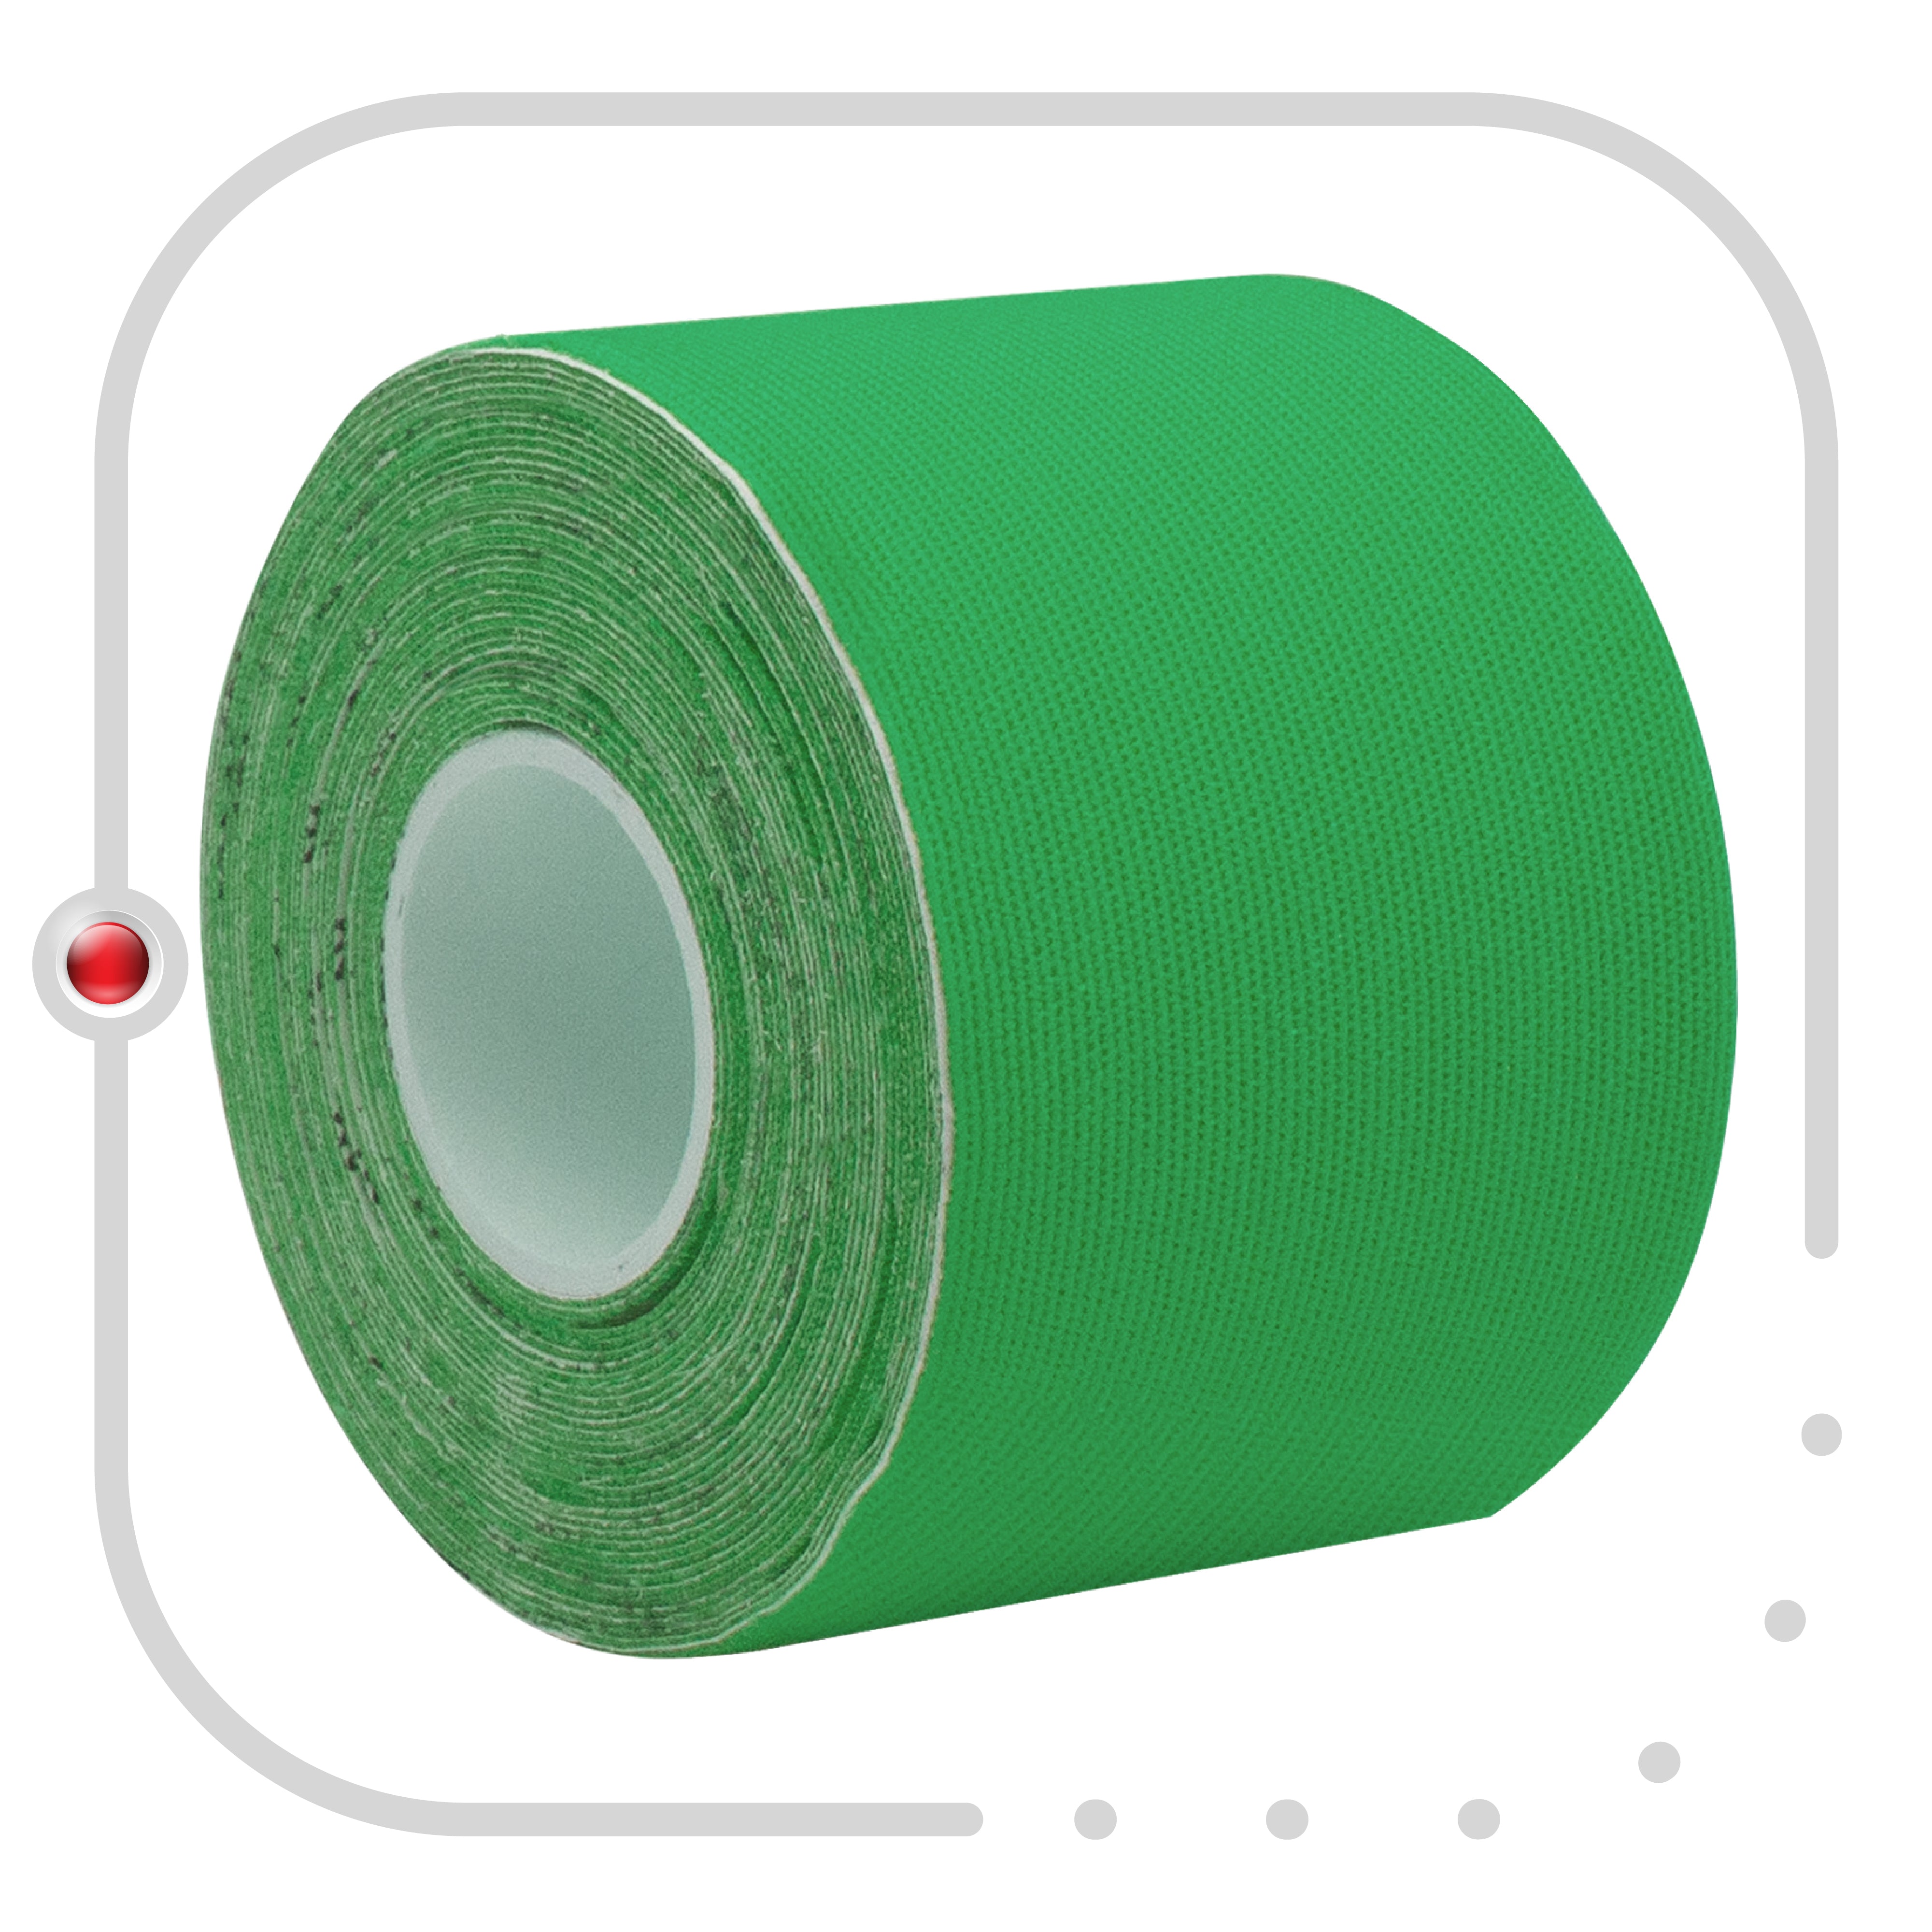 Green Kinesiology Tape Pre Cut with Dispenser - Athletic Sports Tape - For Healing and Recovery